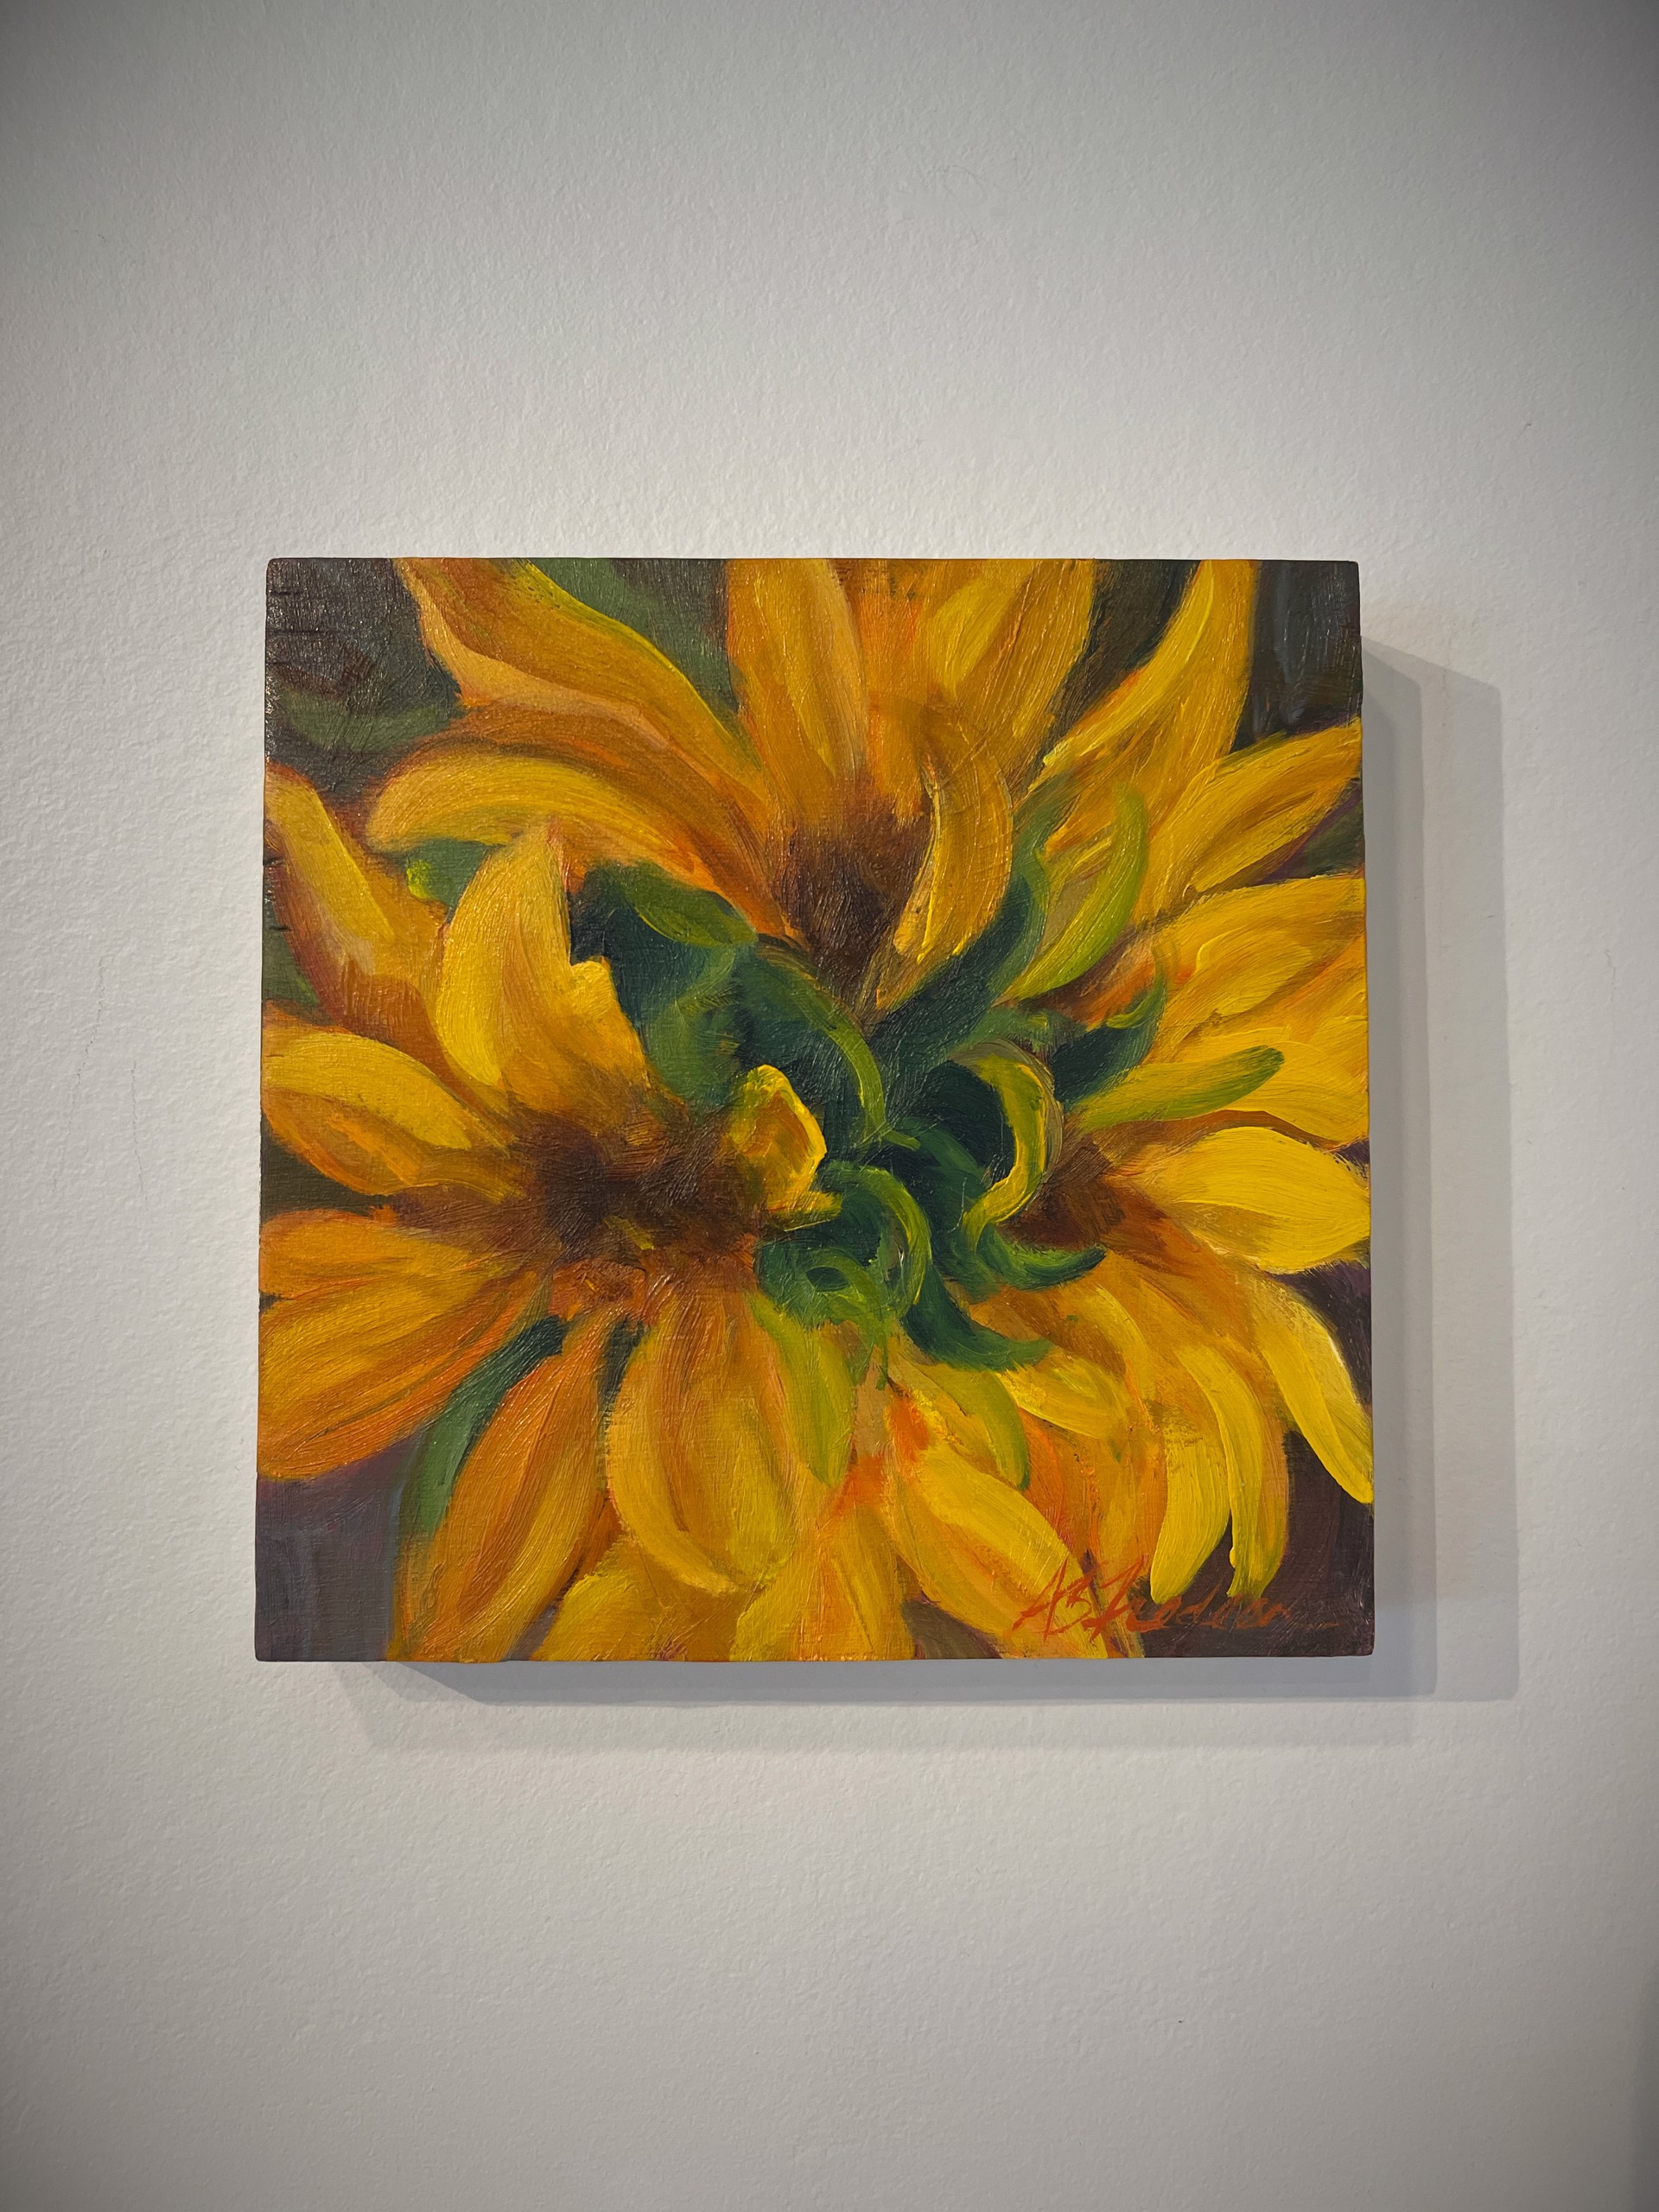 Sunflowers by Andrea S. Fredeen